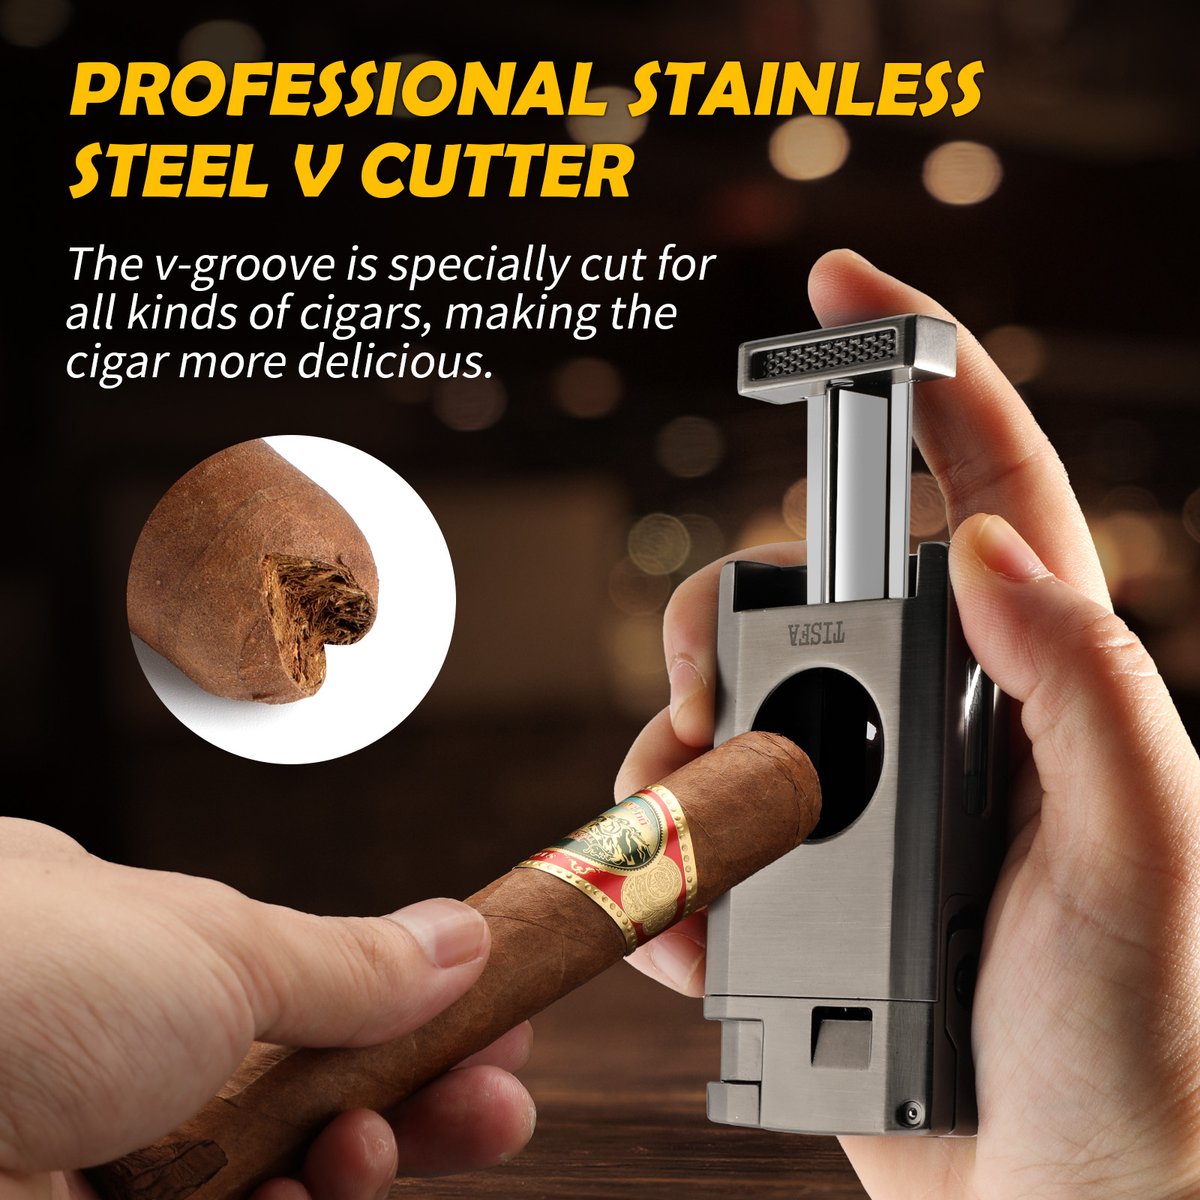 ★ New Dual Flame Torch Lighter with Cigar V Cutter and Punch ★

☆ Not only V-cut but also Punch-cut ☆

#cigarlighter #cigaraccessories #xifeilighter #xifeicigaraccessory #cigar #cigars #cigarsociety #cigarsmoker #cigarlife #cigarlifestyle #cigarlovers  #wholesale #retail